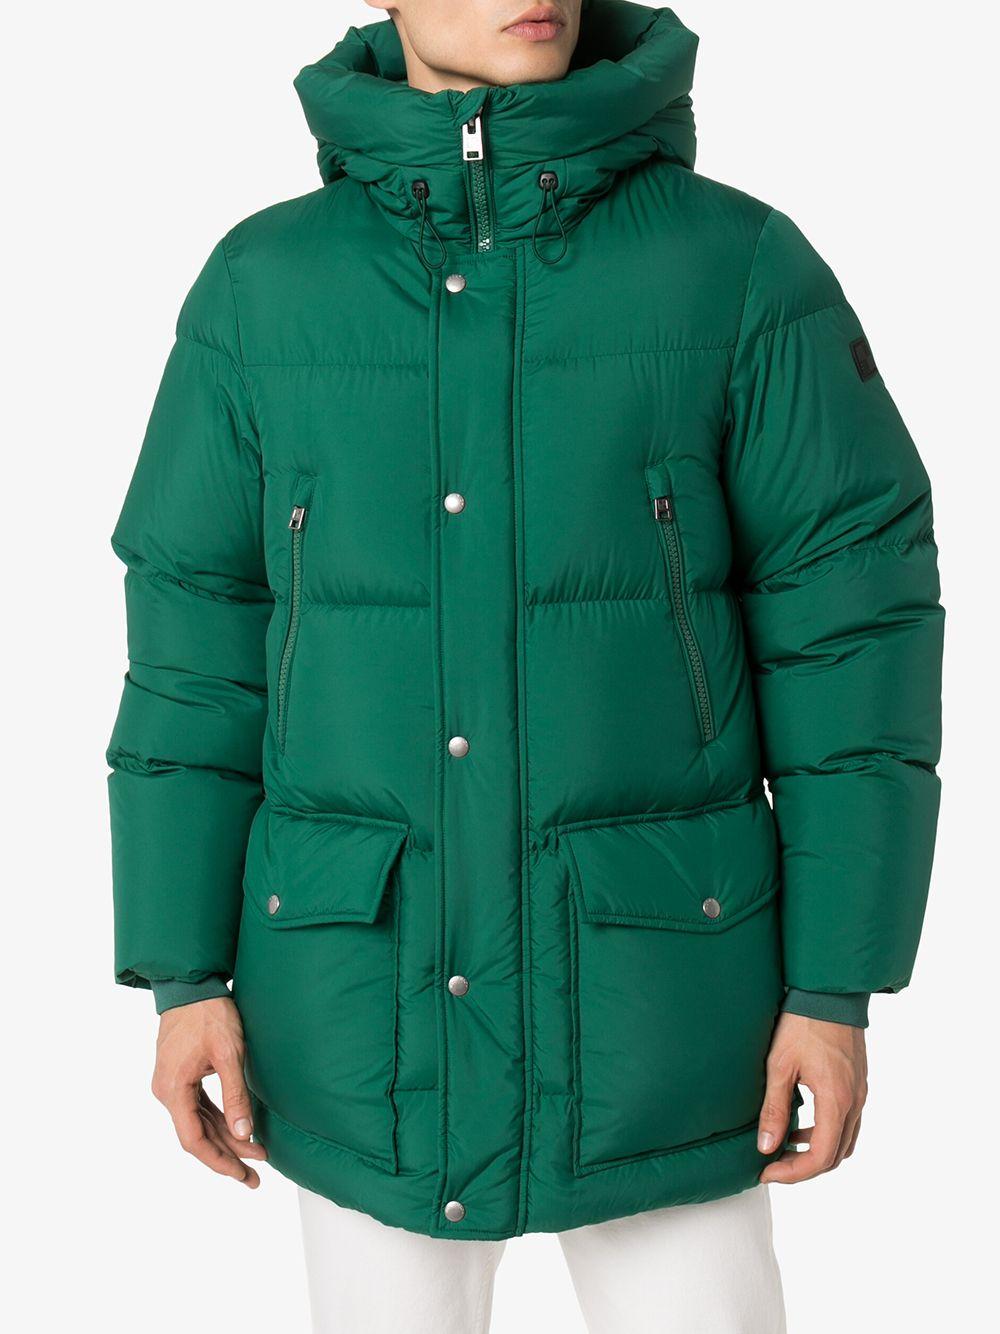 Woolrich Synthetic Sierra Supreme Quilted-down Parka in Green for Men - Lyst